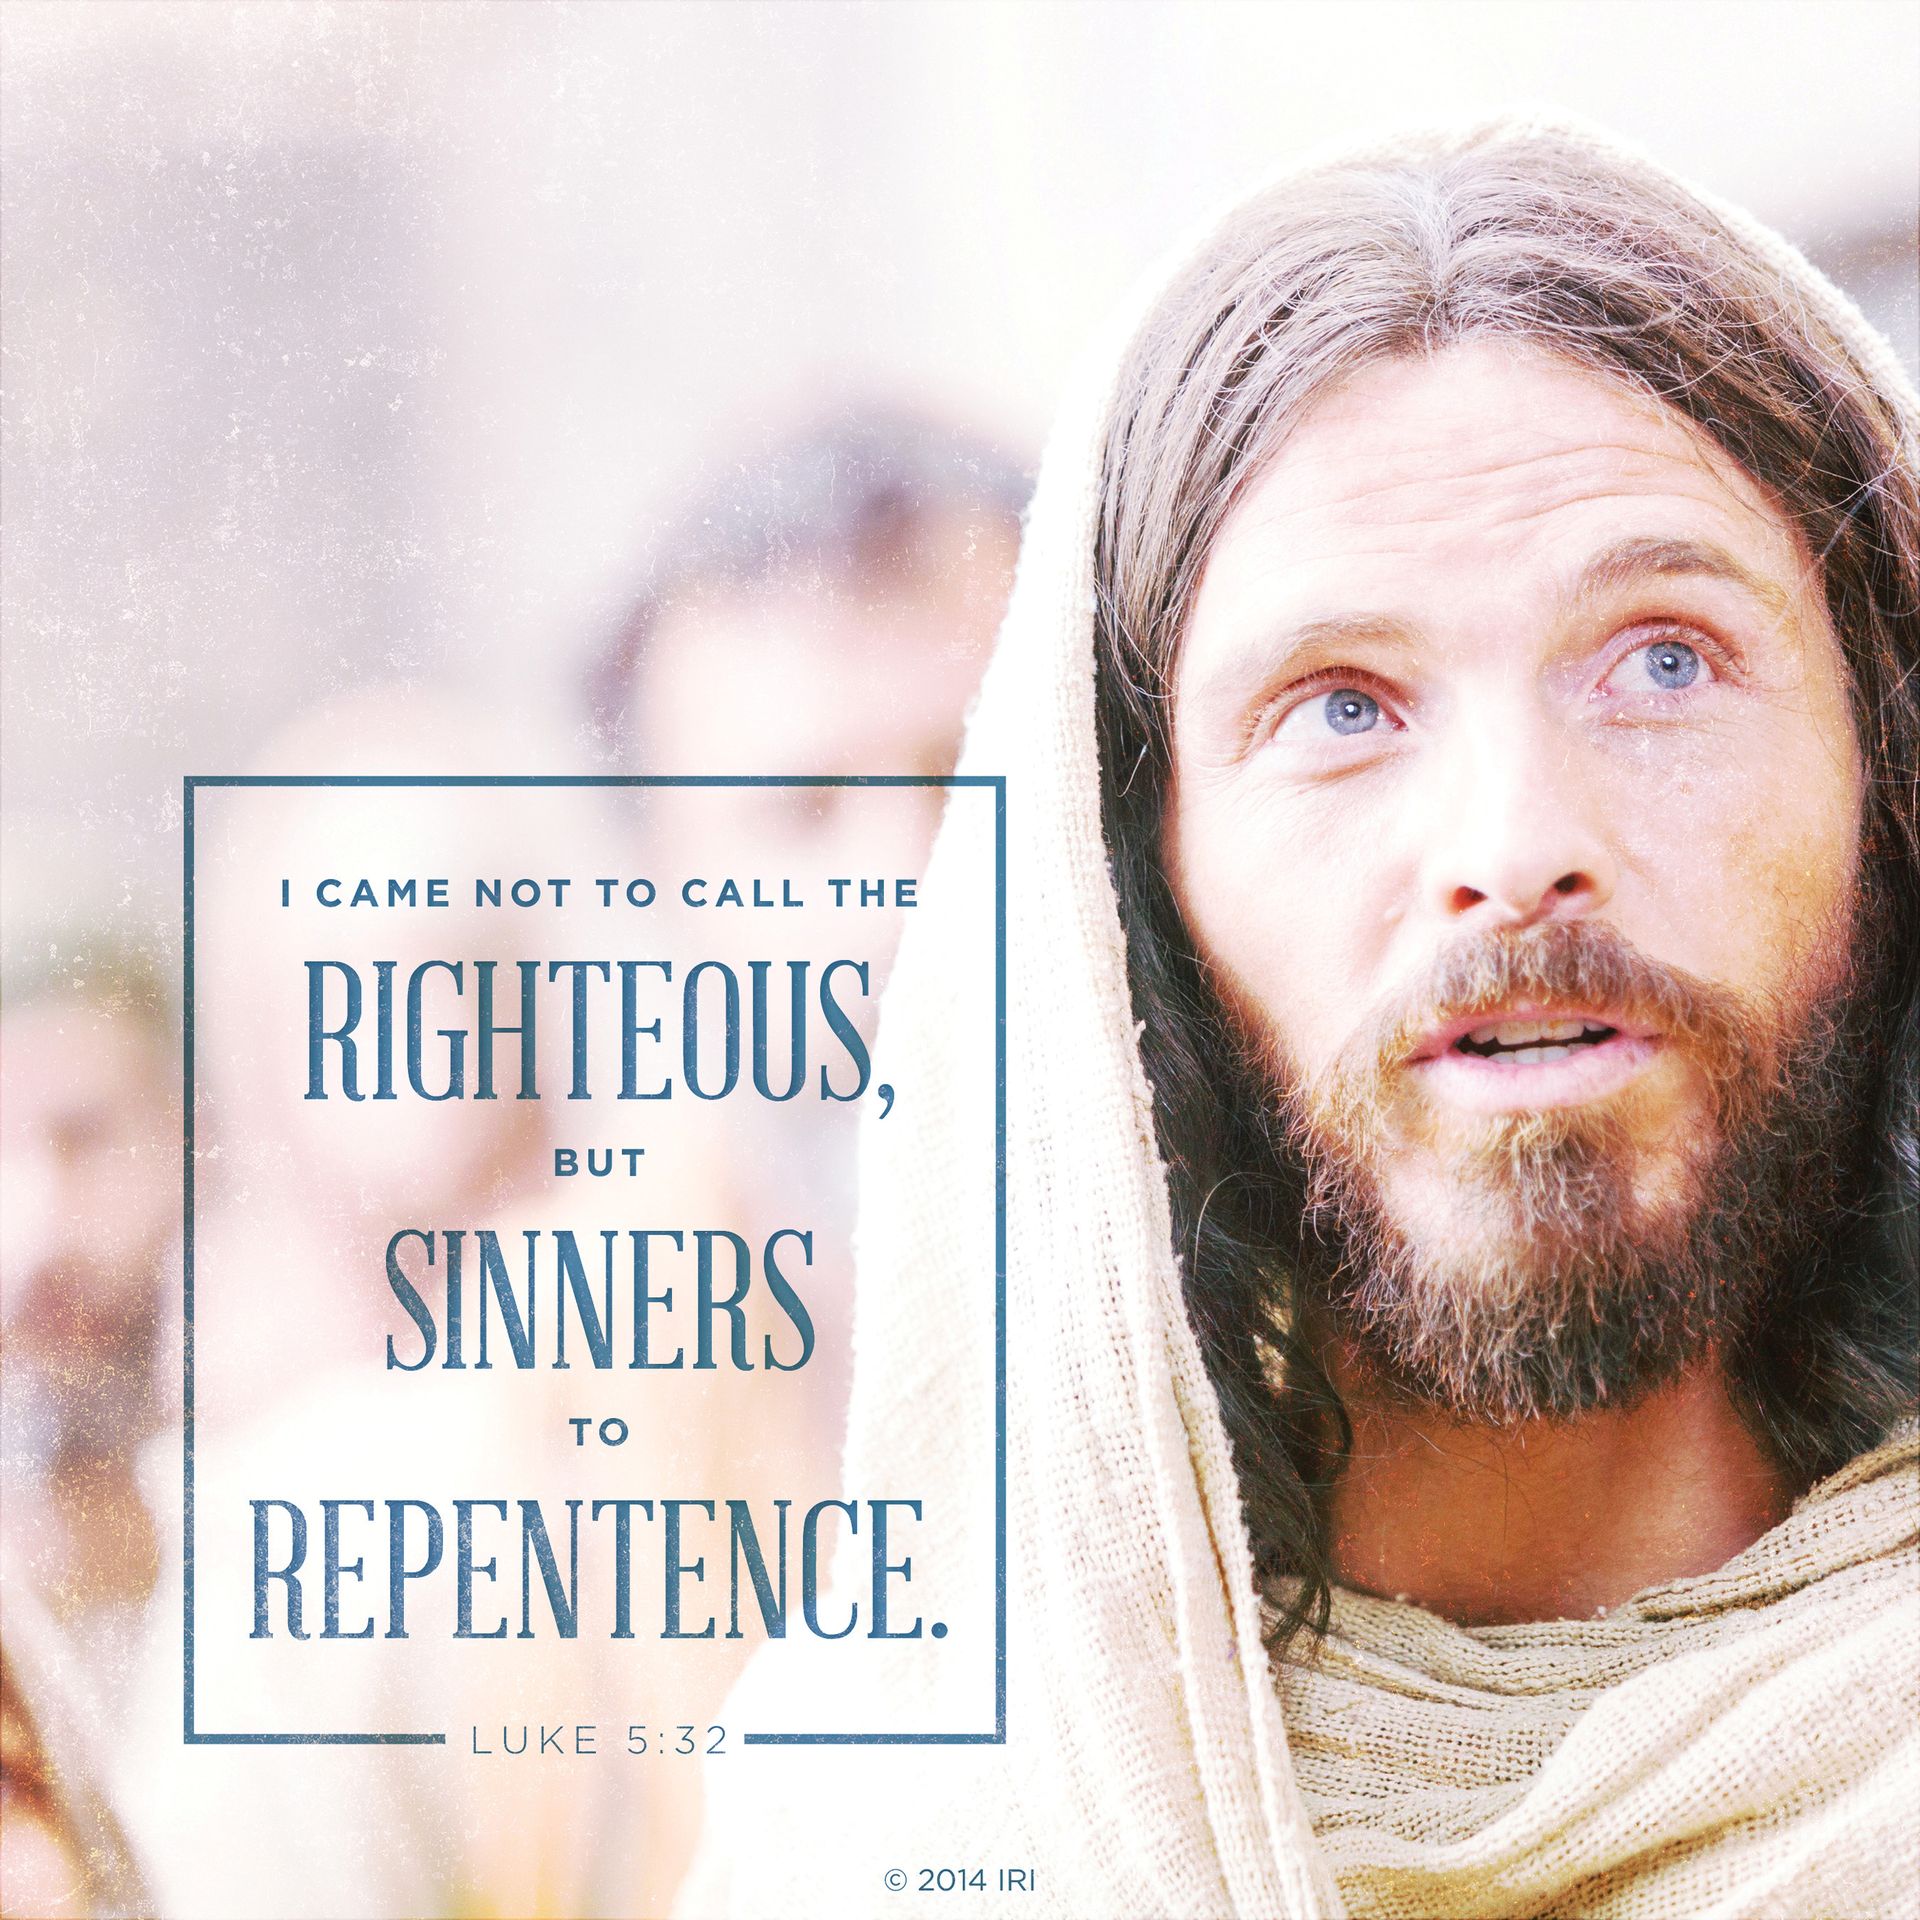 “I came not to call the righteous, but sinners to repentance.”—Luke 5:32